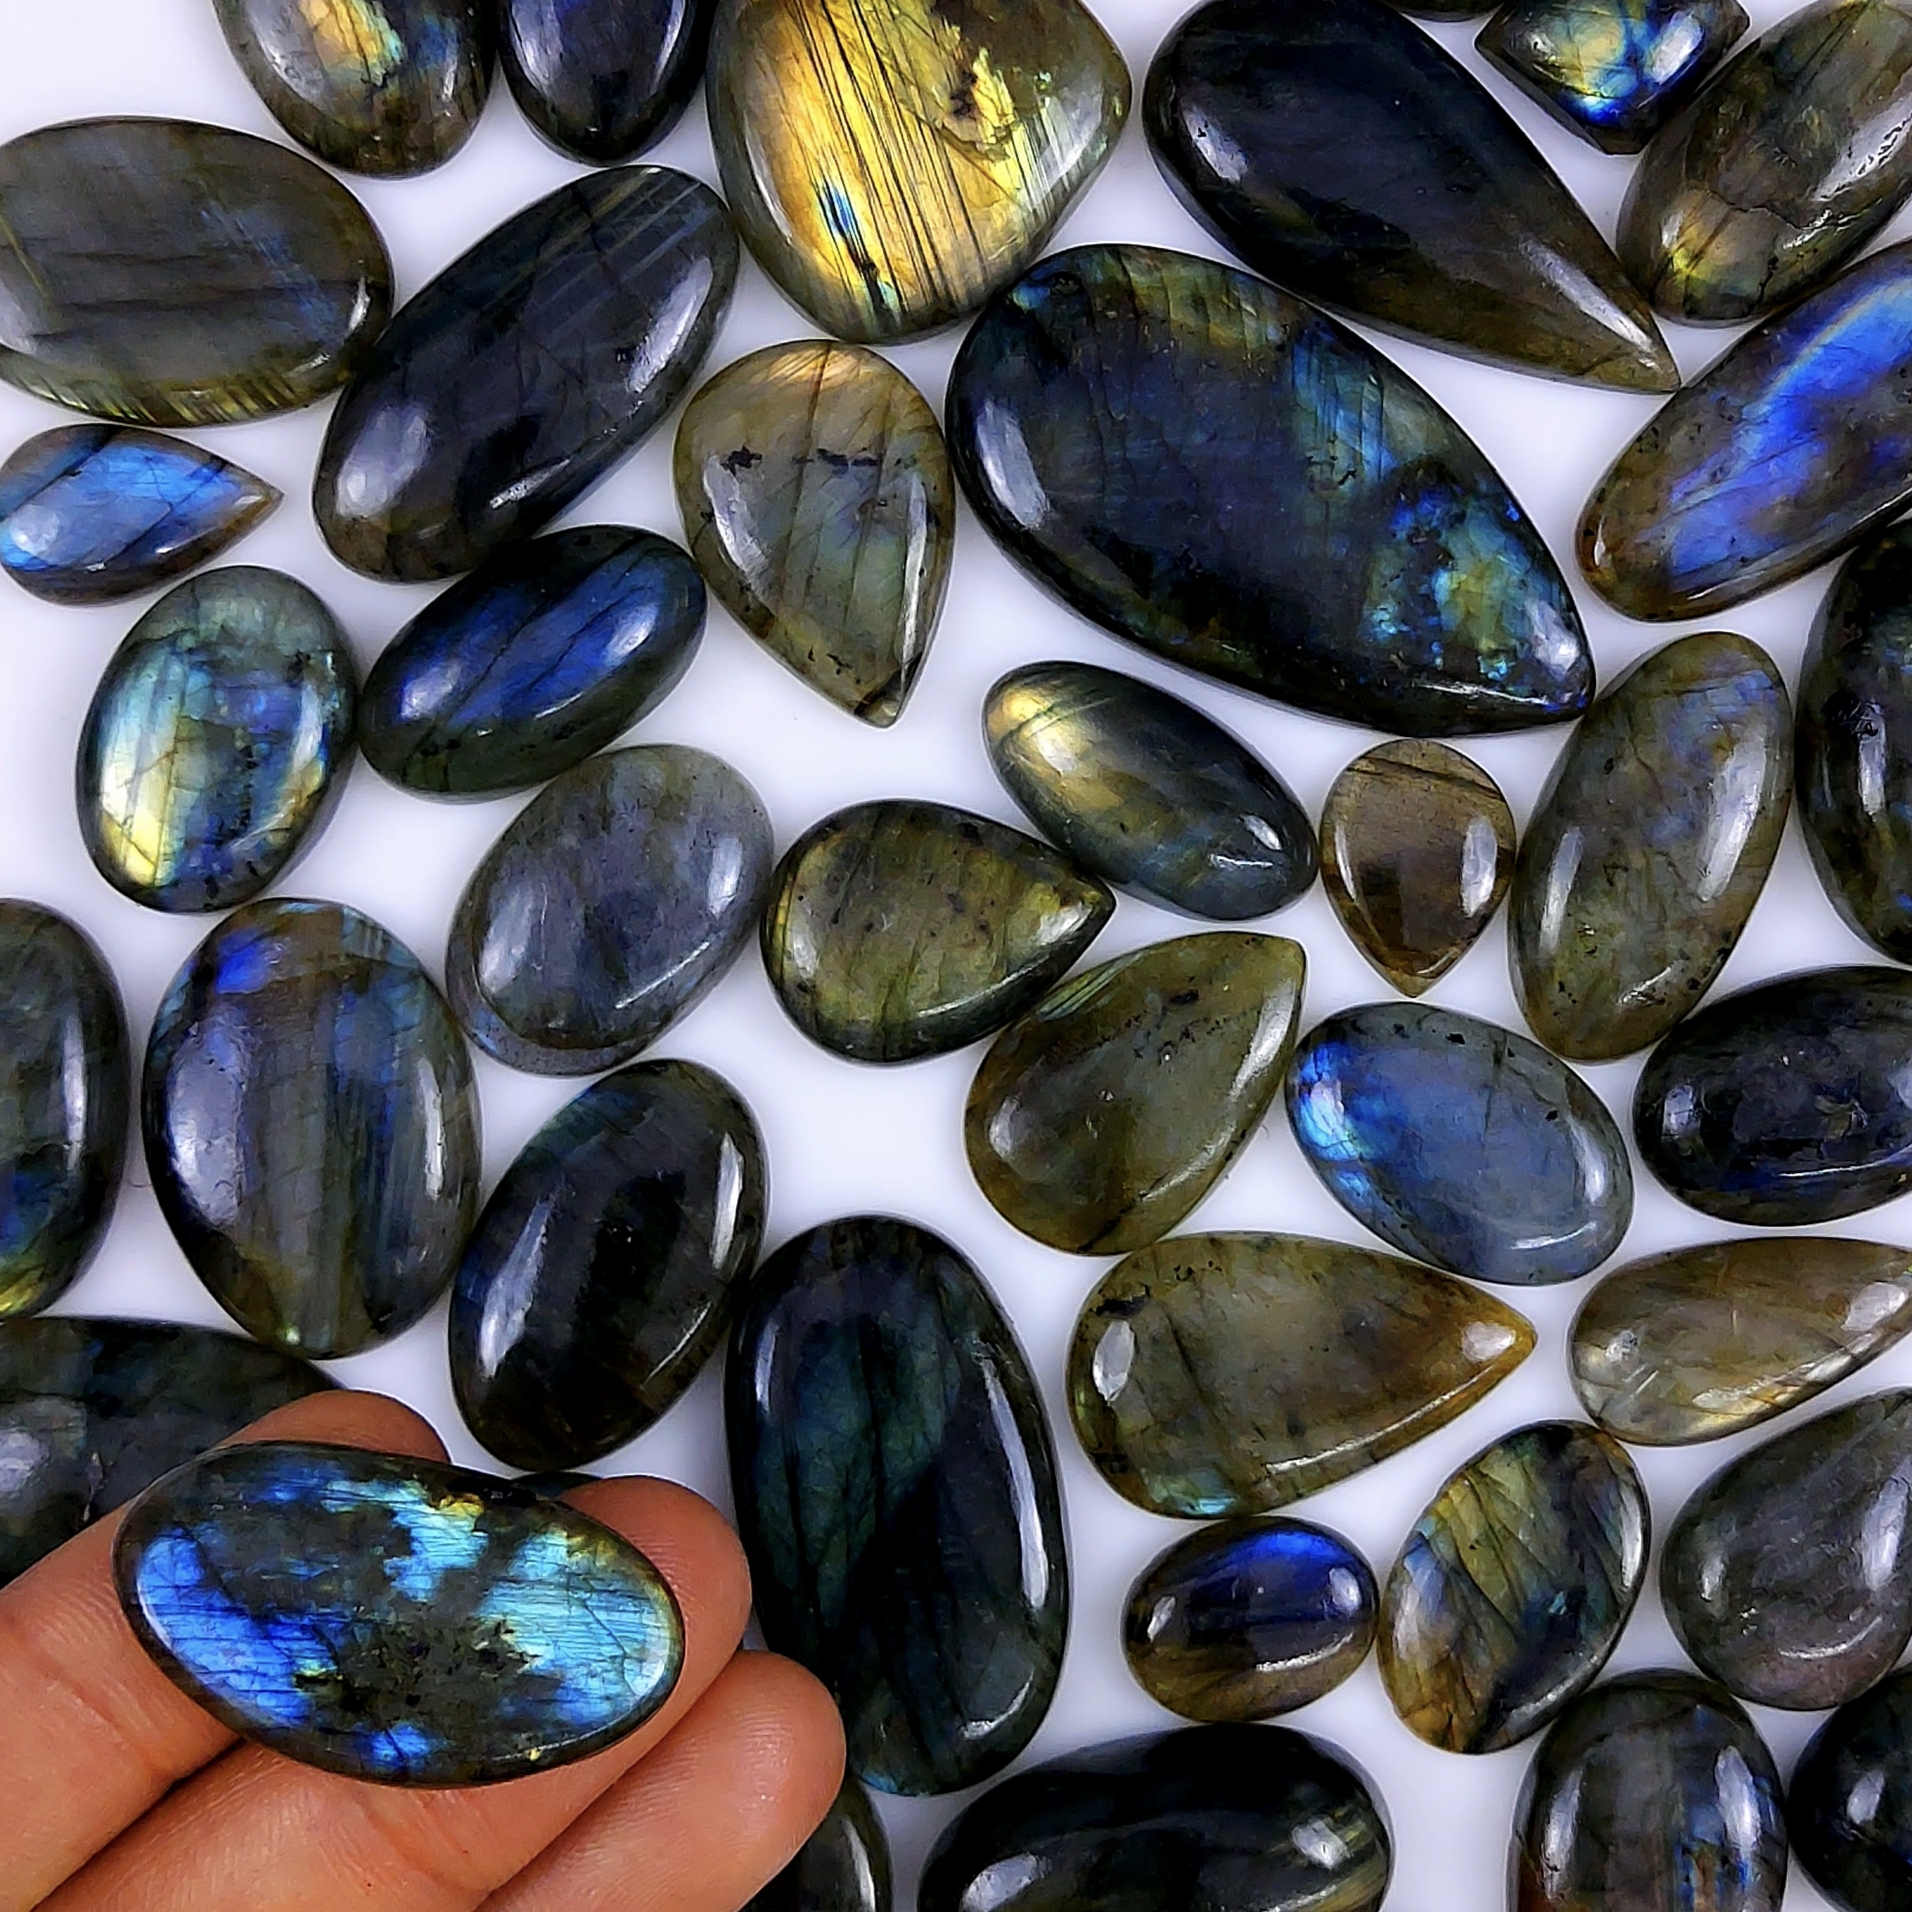 46pc 1668Cts Labradorite Cabochon Multifire Healing Crystal For Jewelry Supplies, Labradorite Necklace Handmade Wire Wrapped Gemstone Pendant 54x28 18x14mm#6268